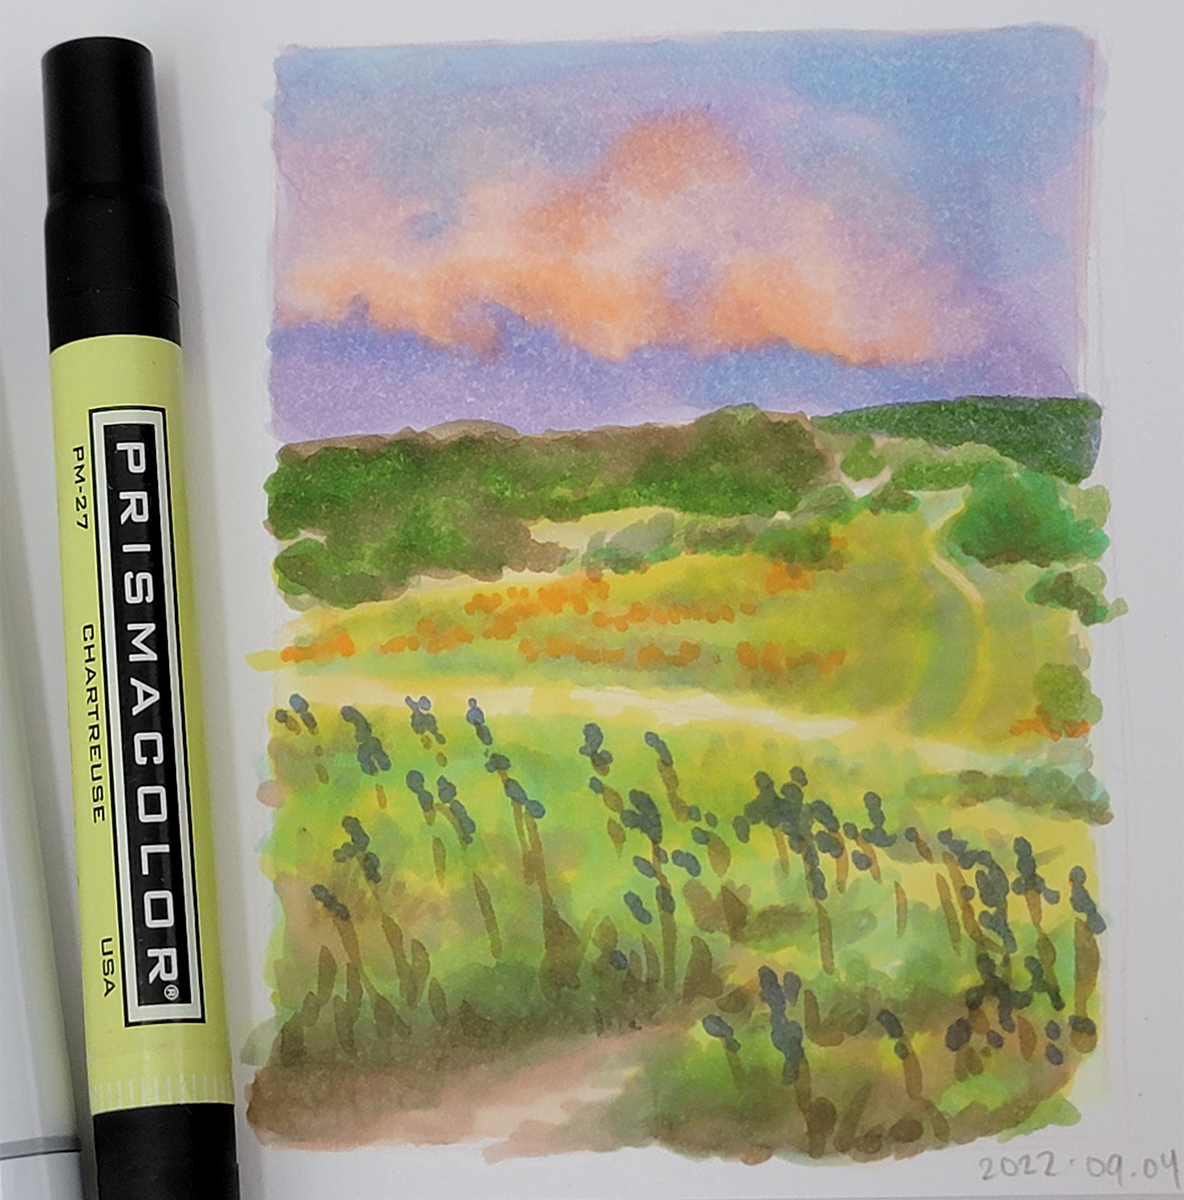 A marker photo study of a field at sunset. The sky is dark lavender with orange clouds.